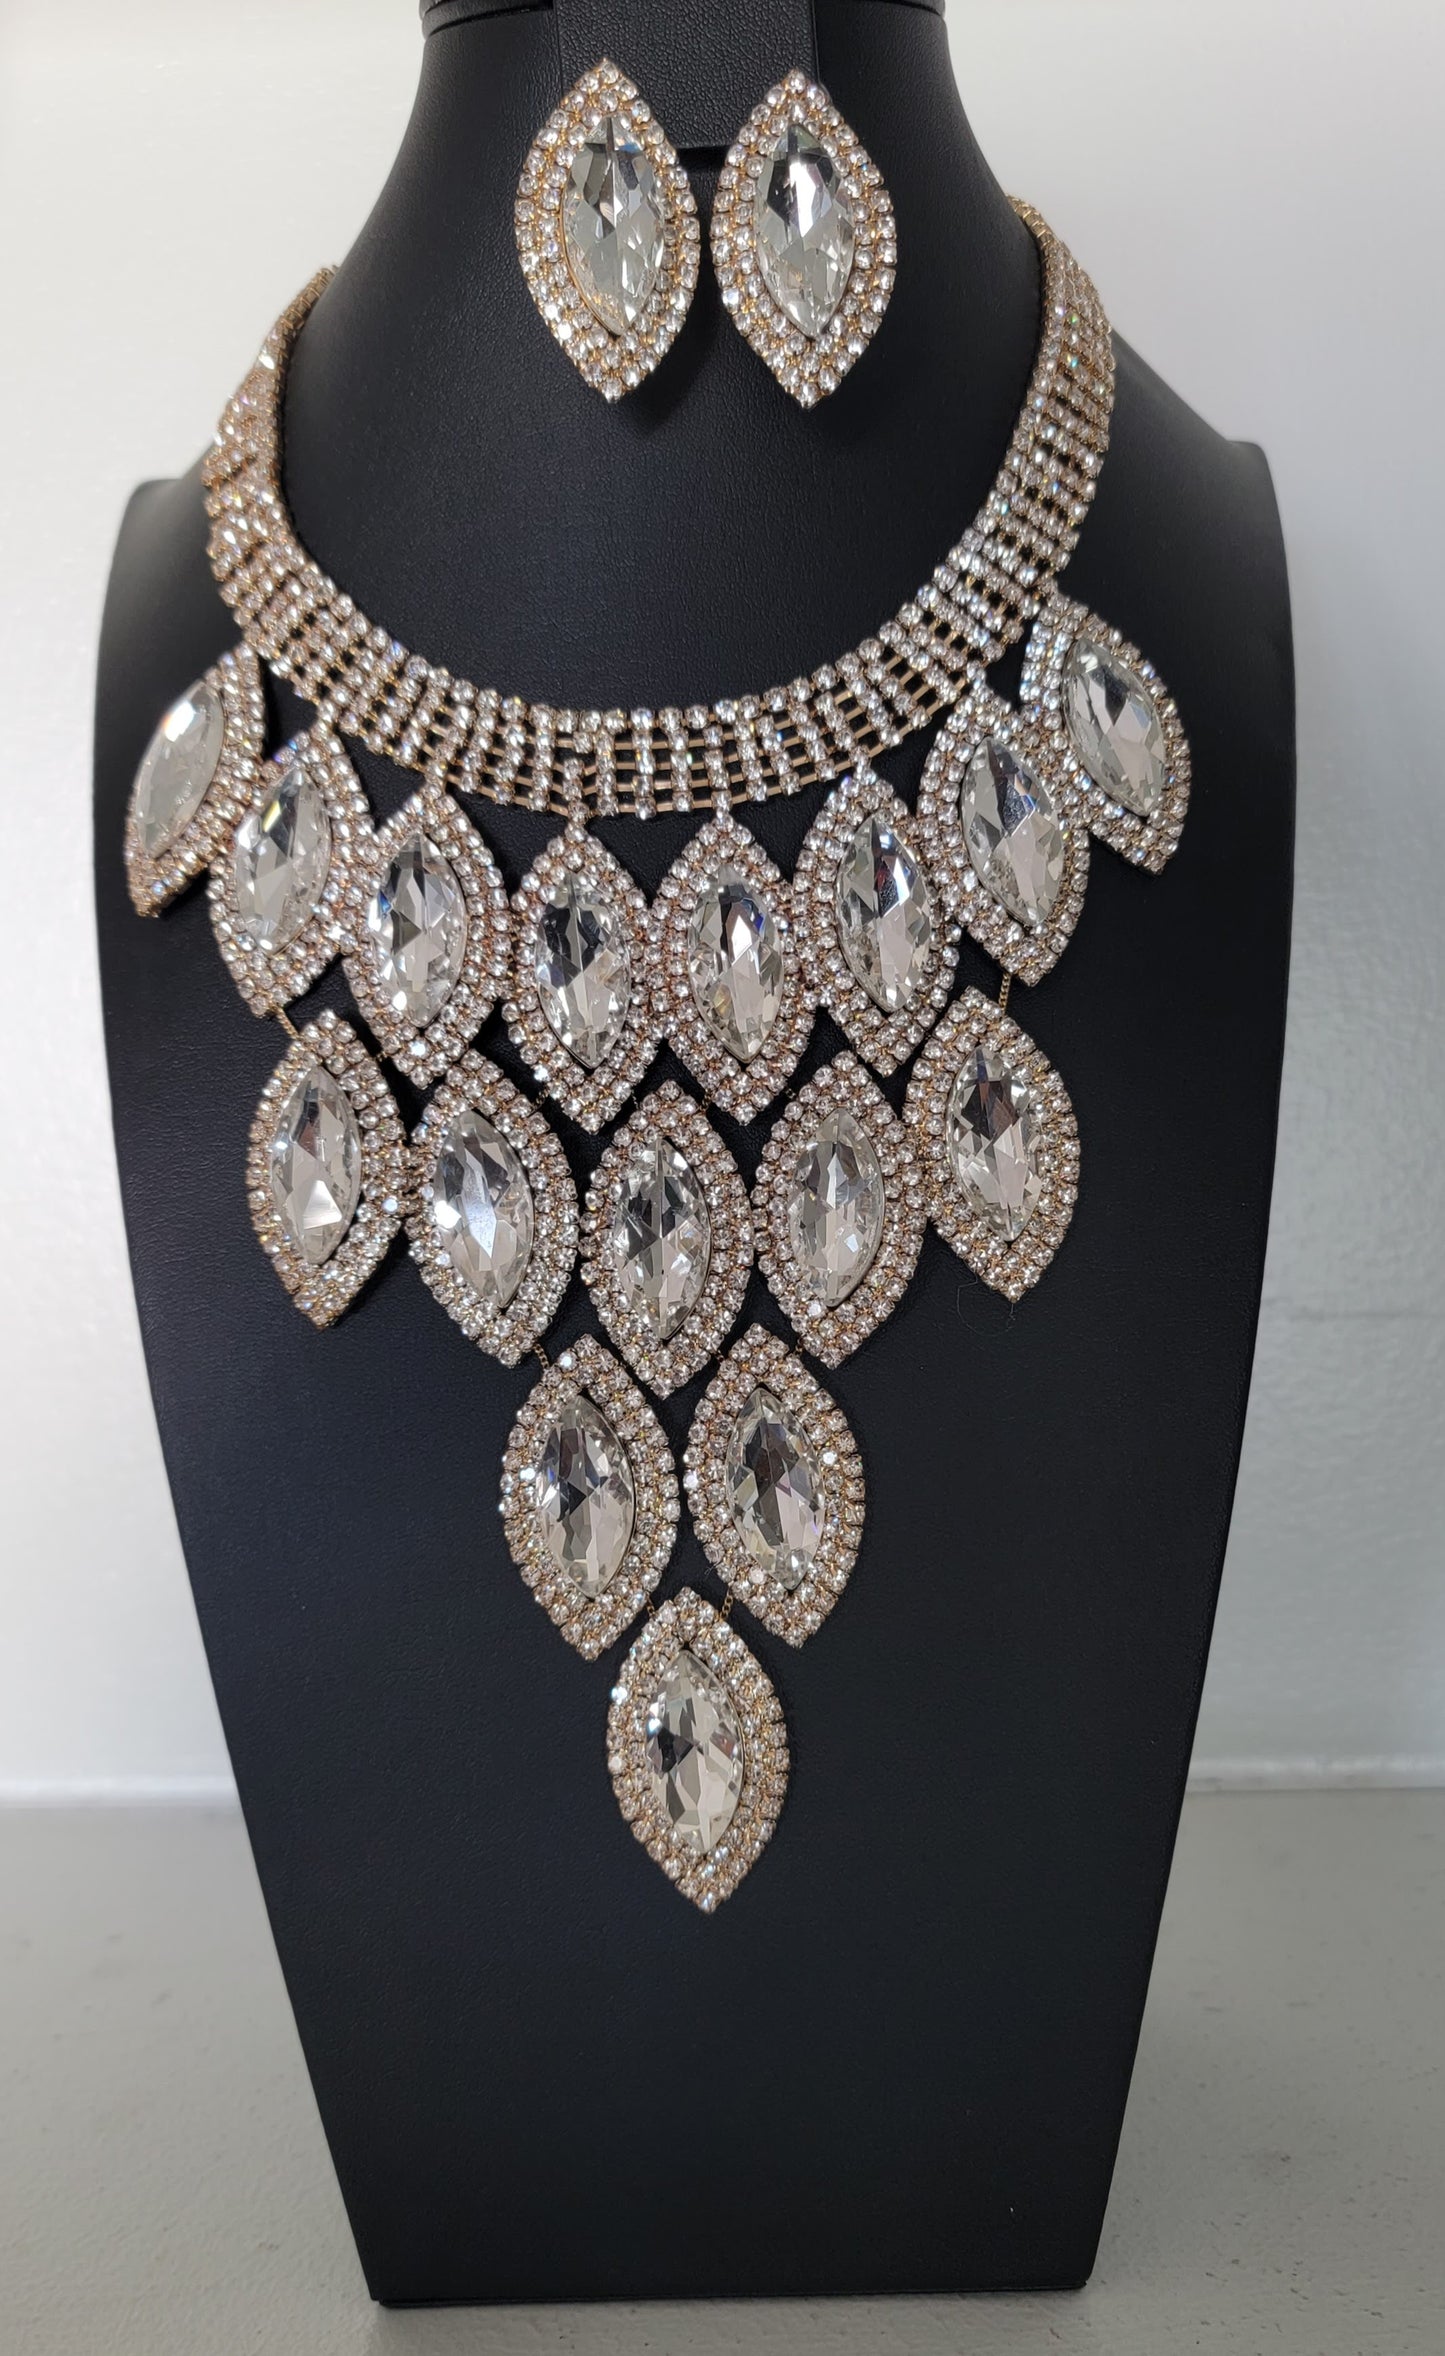 Stone Bling Necklace